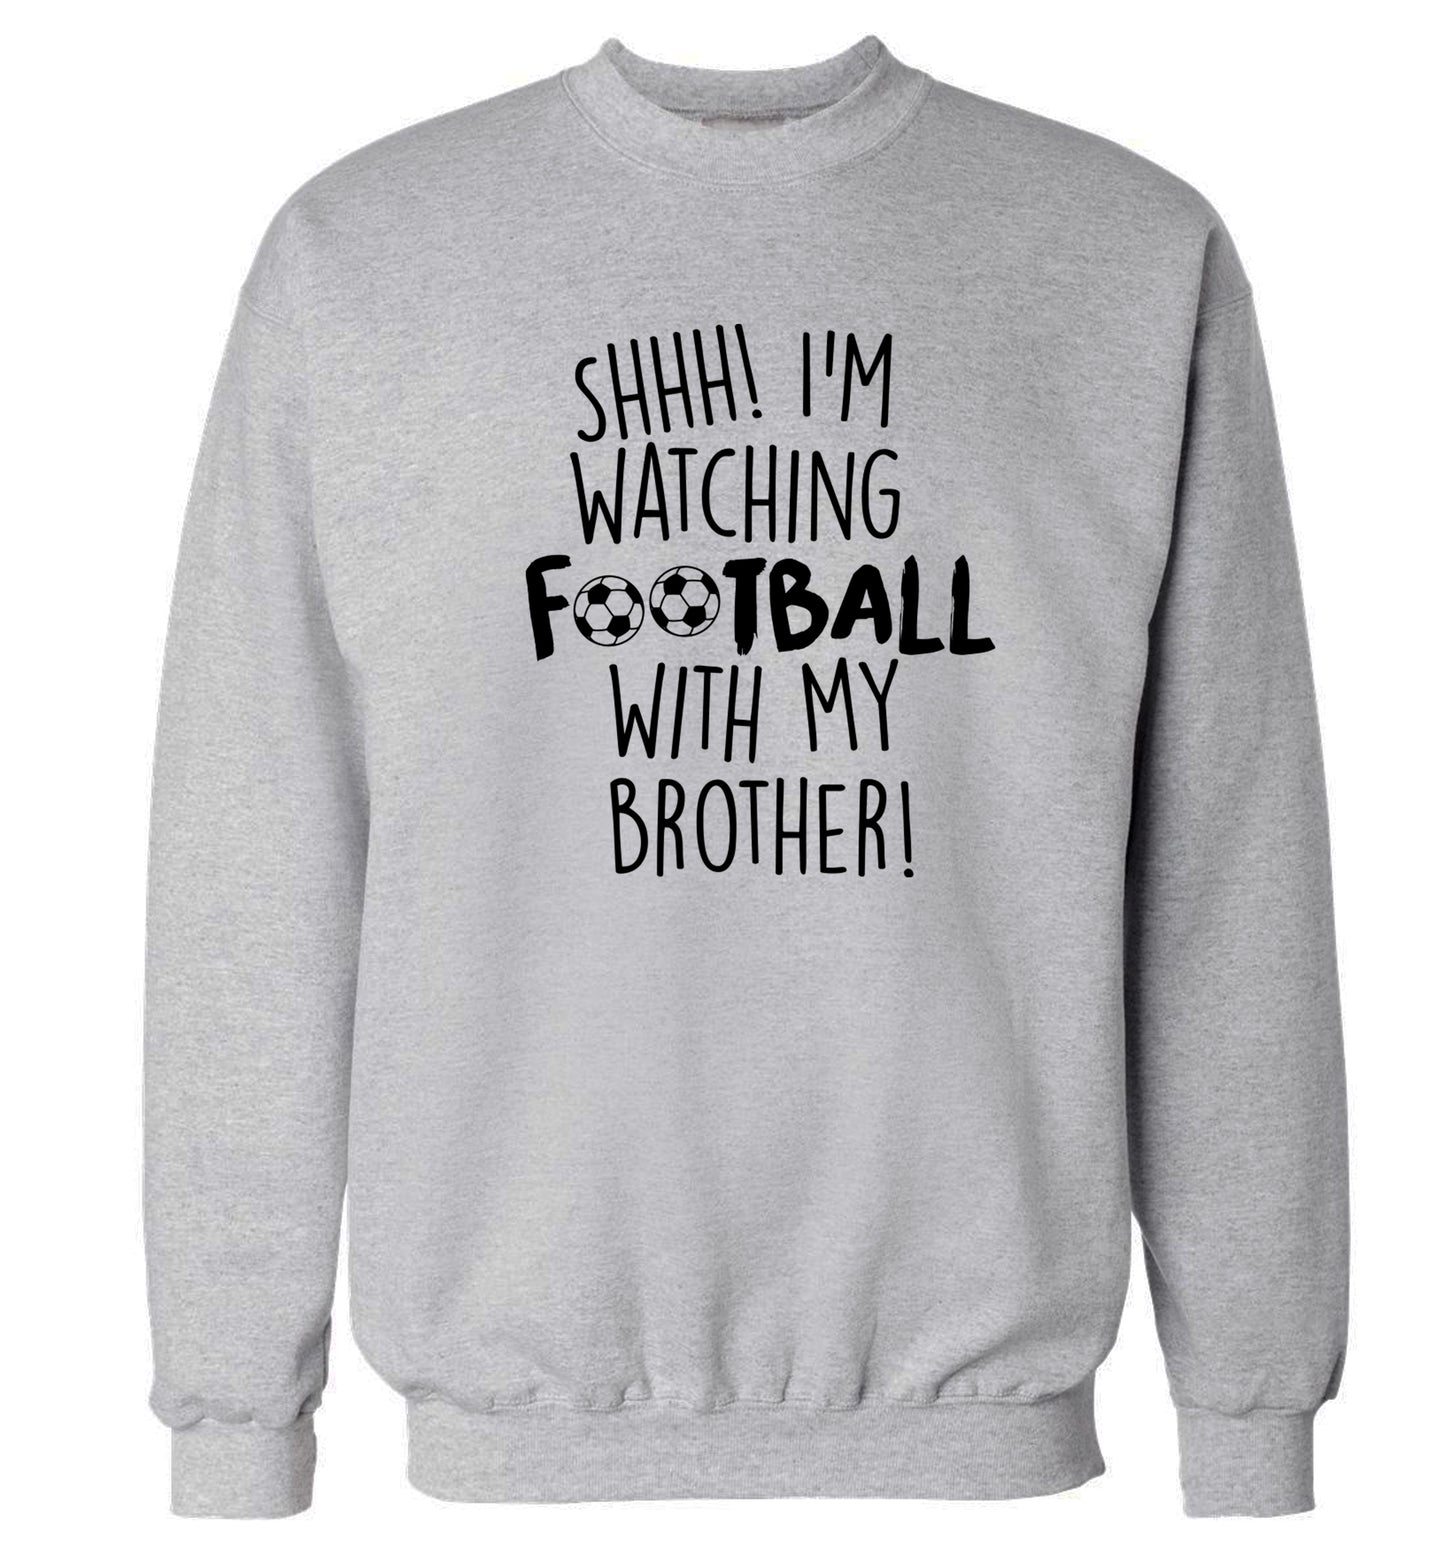 Shhh I'm watching football with my brother Adult's unisexgrey Sweater 2XL